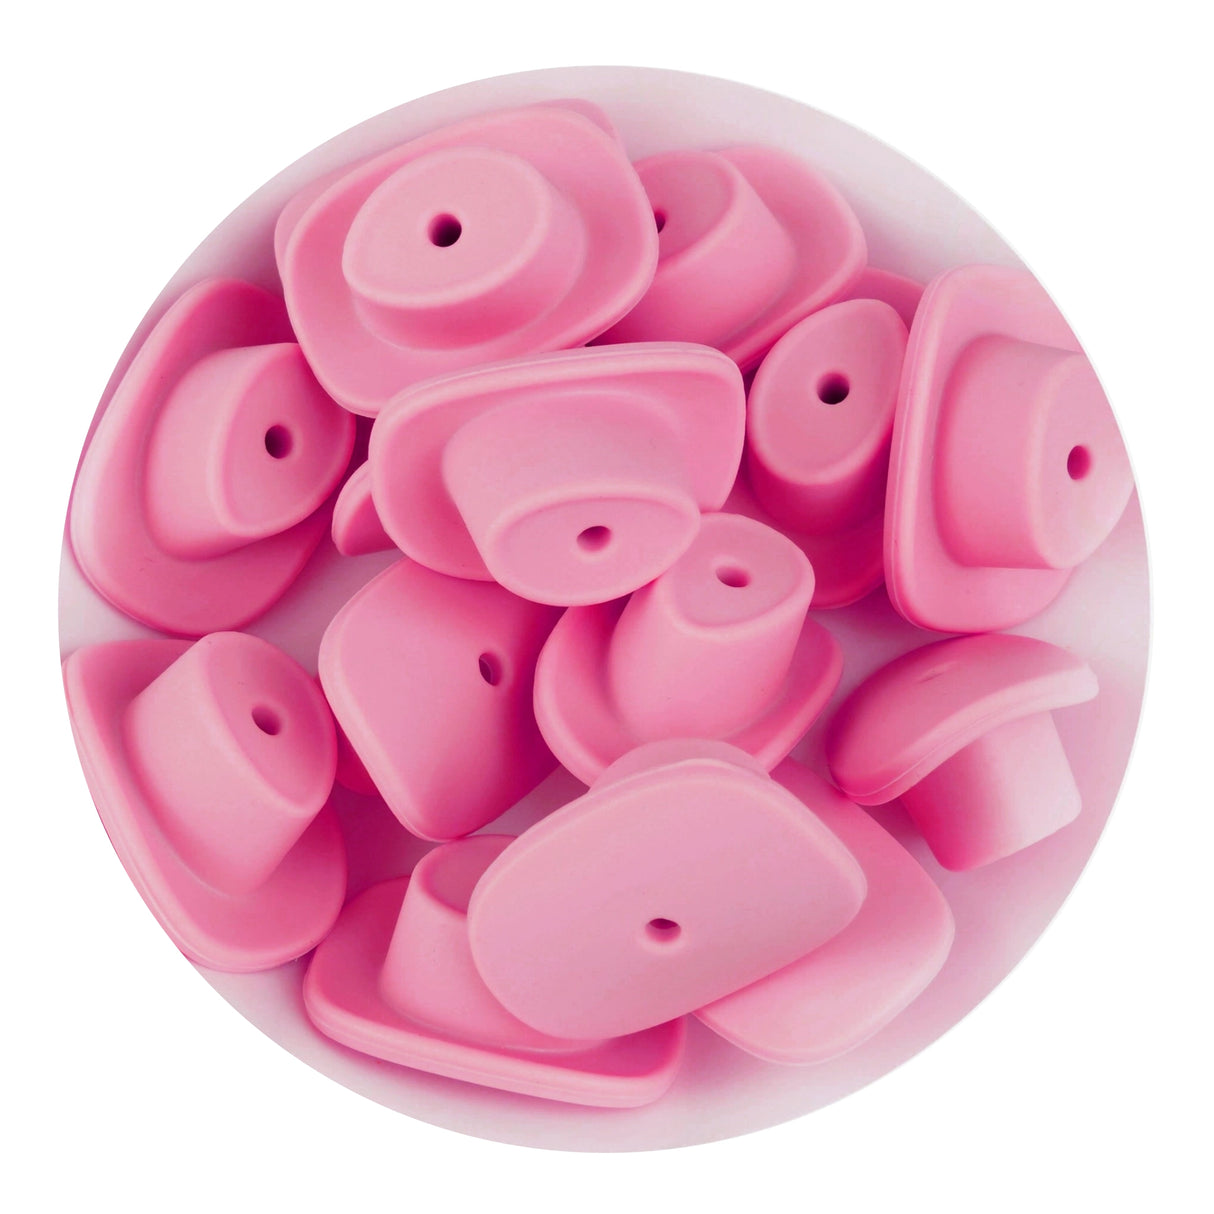 Silicone Focal Bead Cowboy Hat - Pink